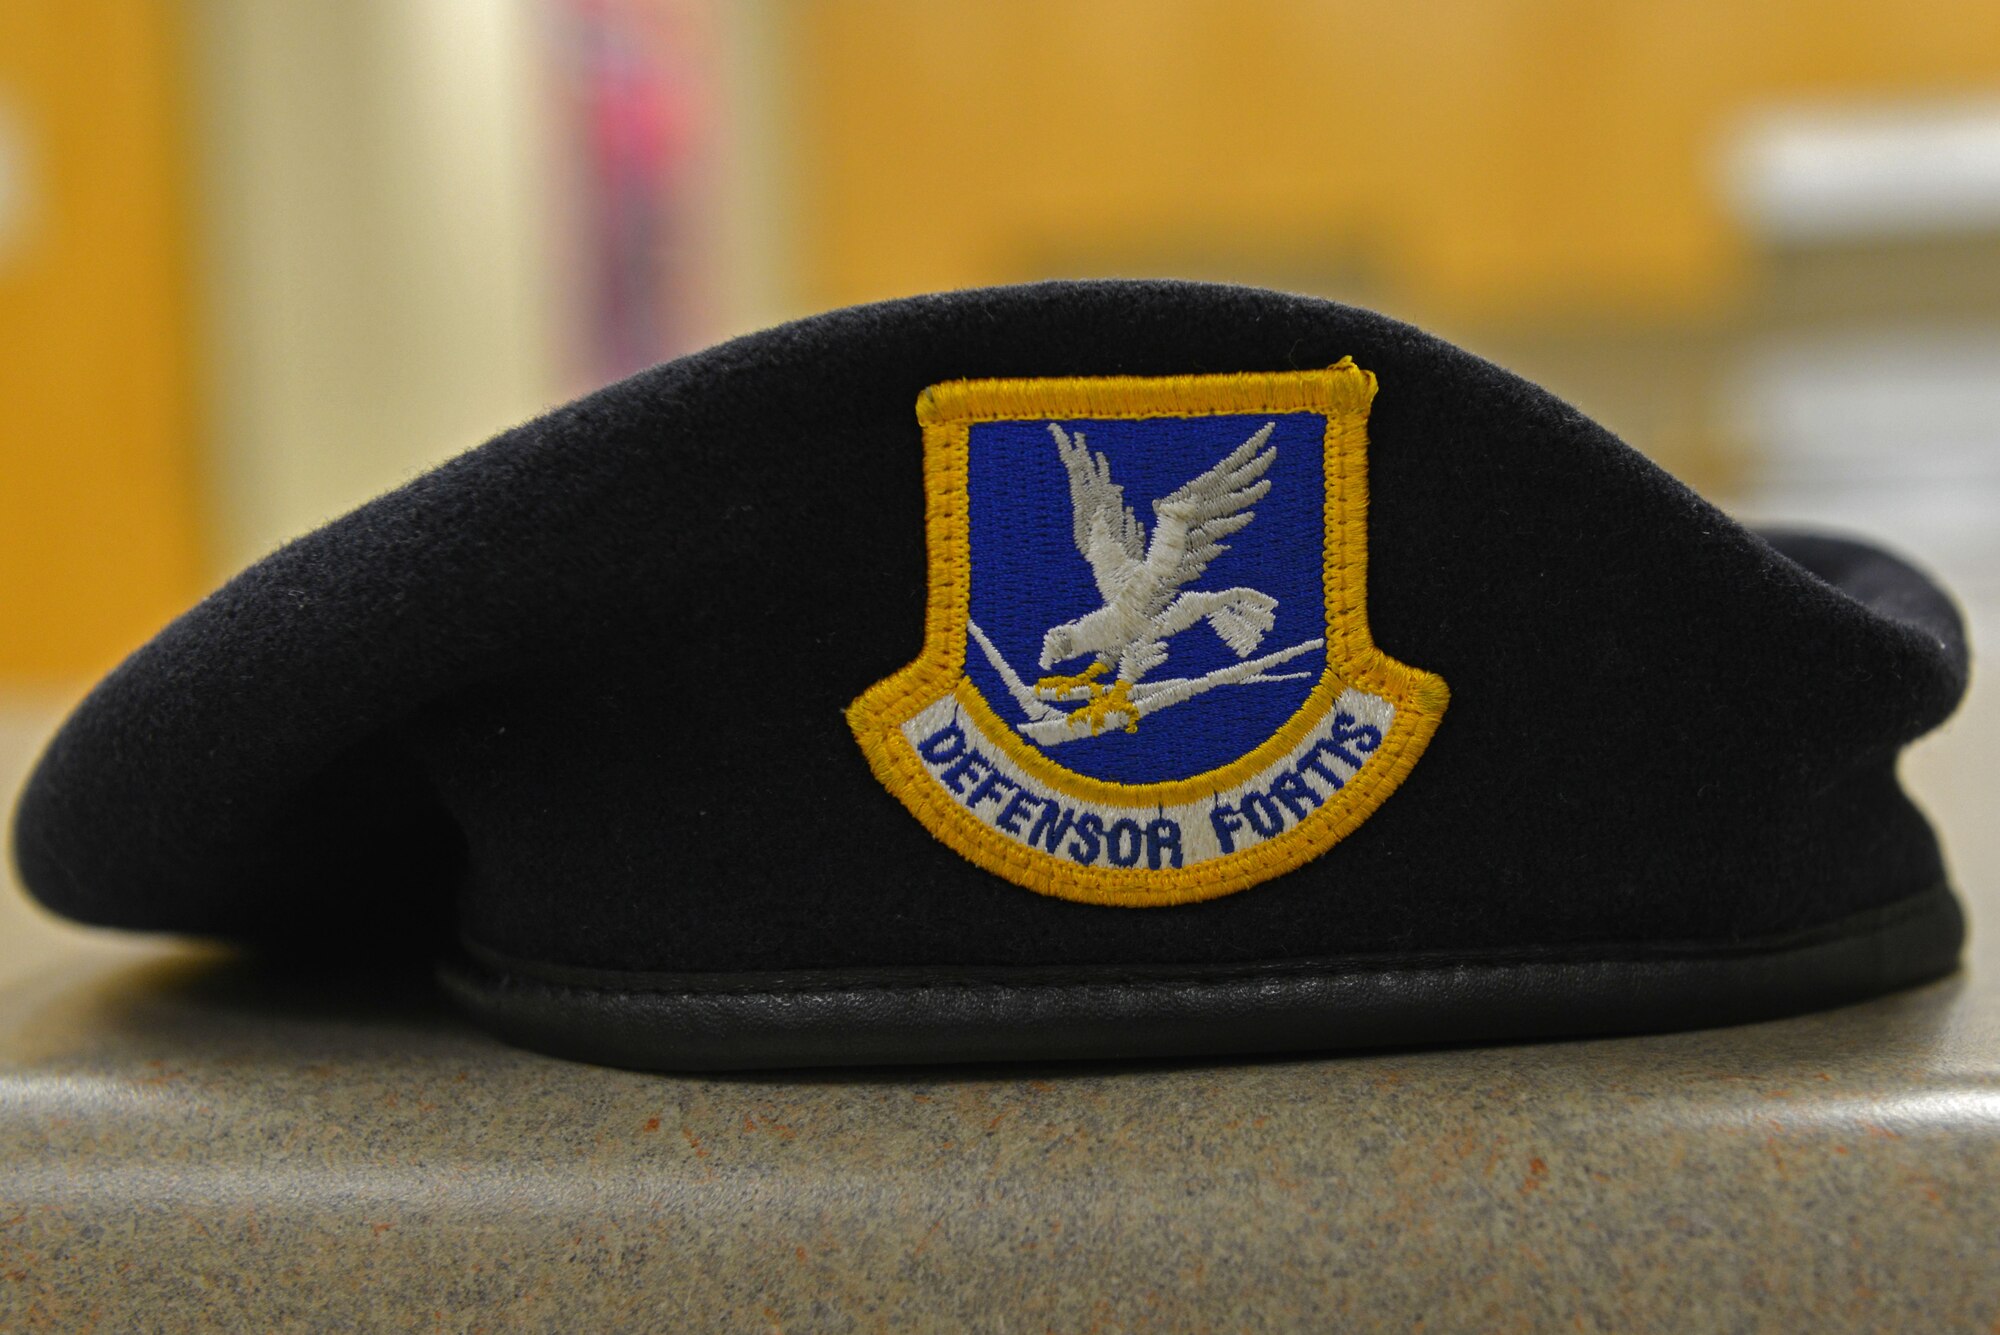 A 20th Security Forces Squadron blue beret lies on a counter at Shaw Air Force Base, S.C., Jan. 18, 2017. The beret displays the security forces motto, “Defensor Fortis,” which is Latin for “Defenders of the Force.” Security forces Airmen maintain readiness to provide defense both at home and downrange. (U.S. Air Force photo by Airman 1st Class Destinee Sweeney)